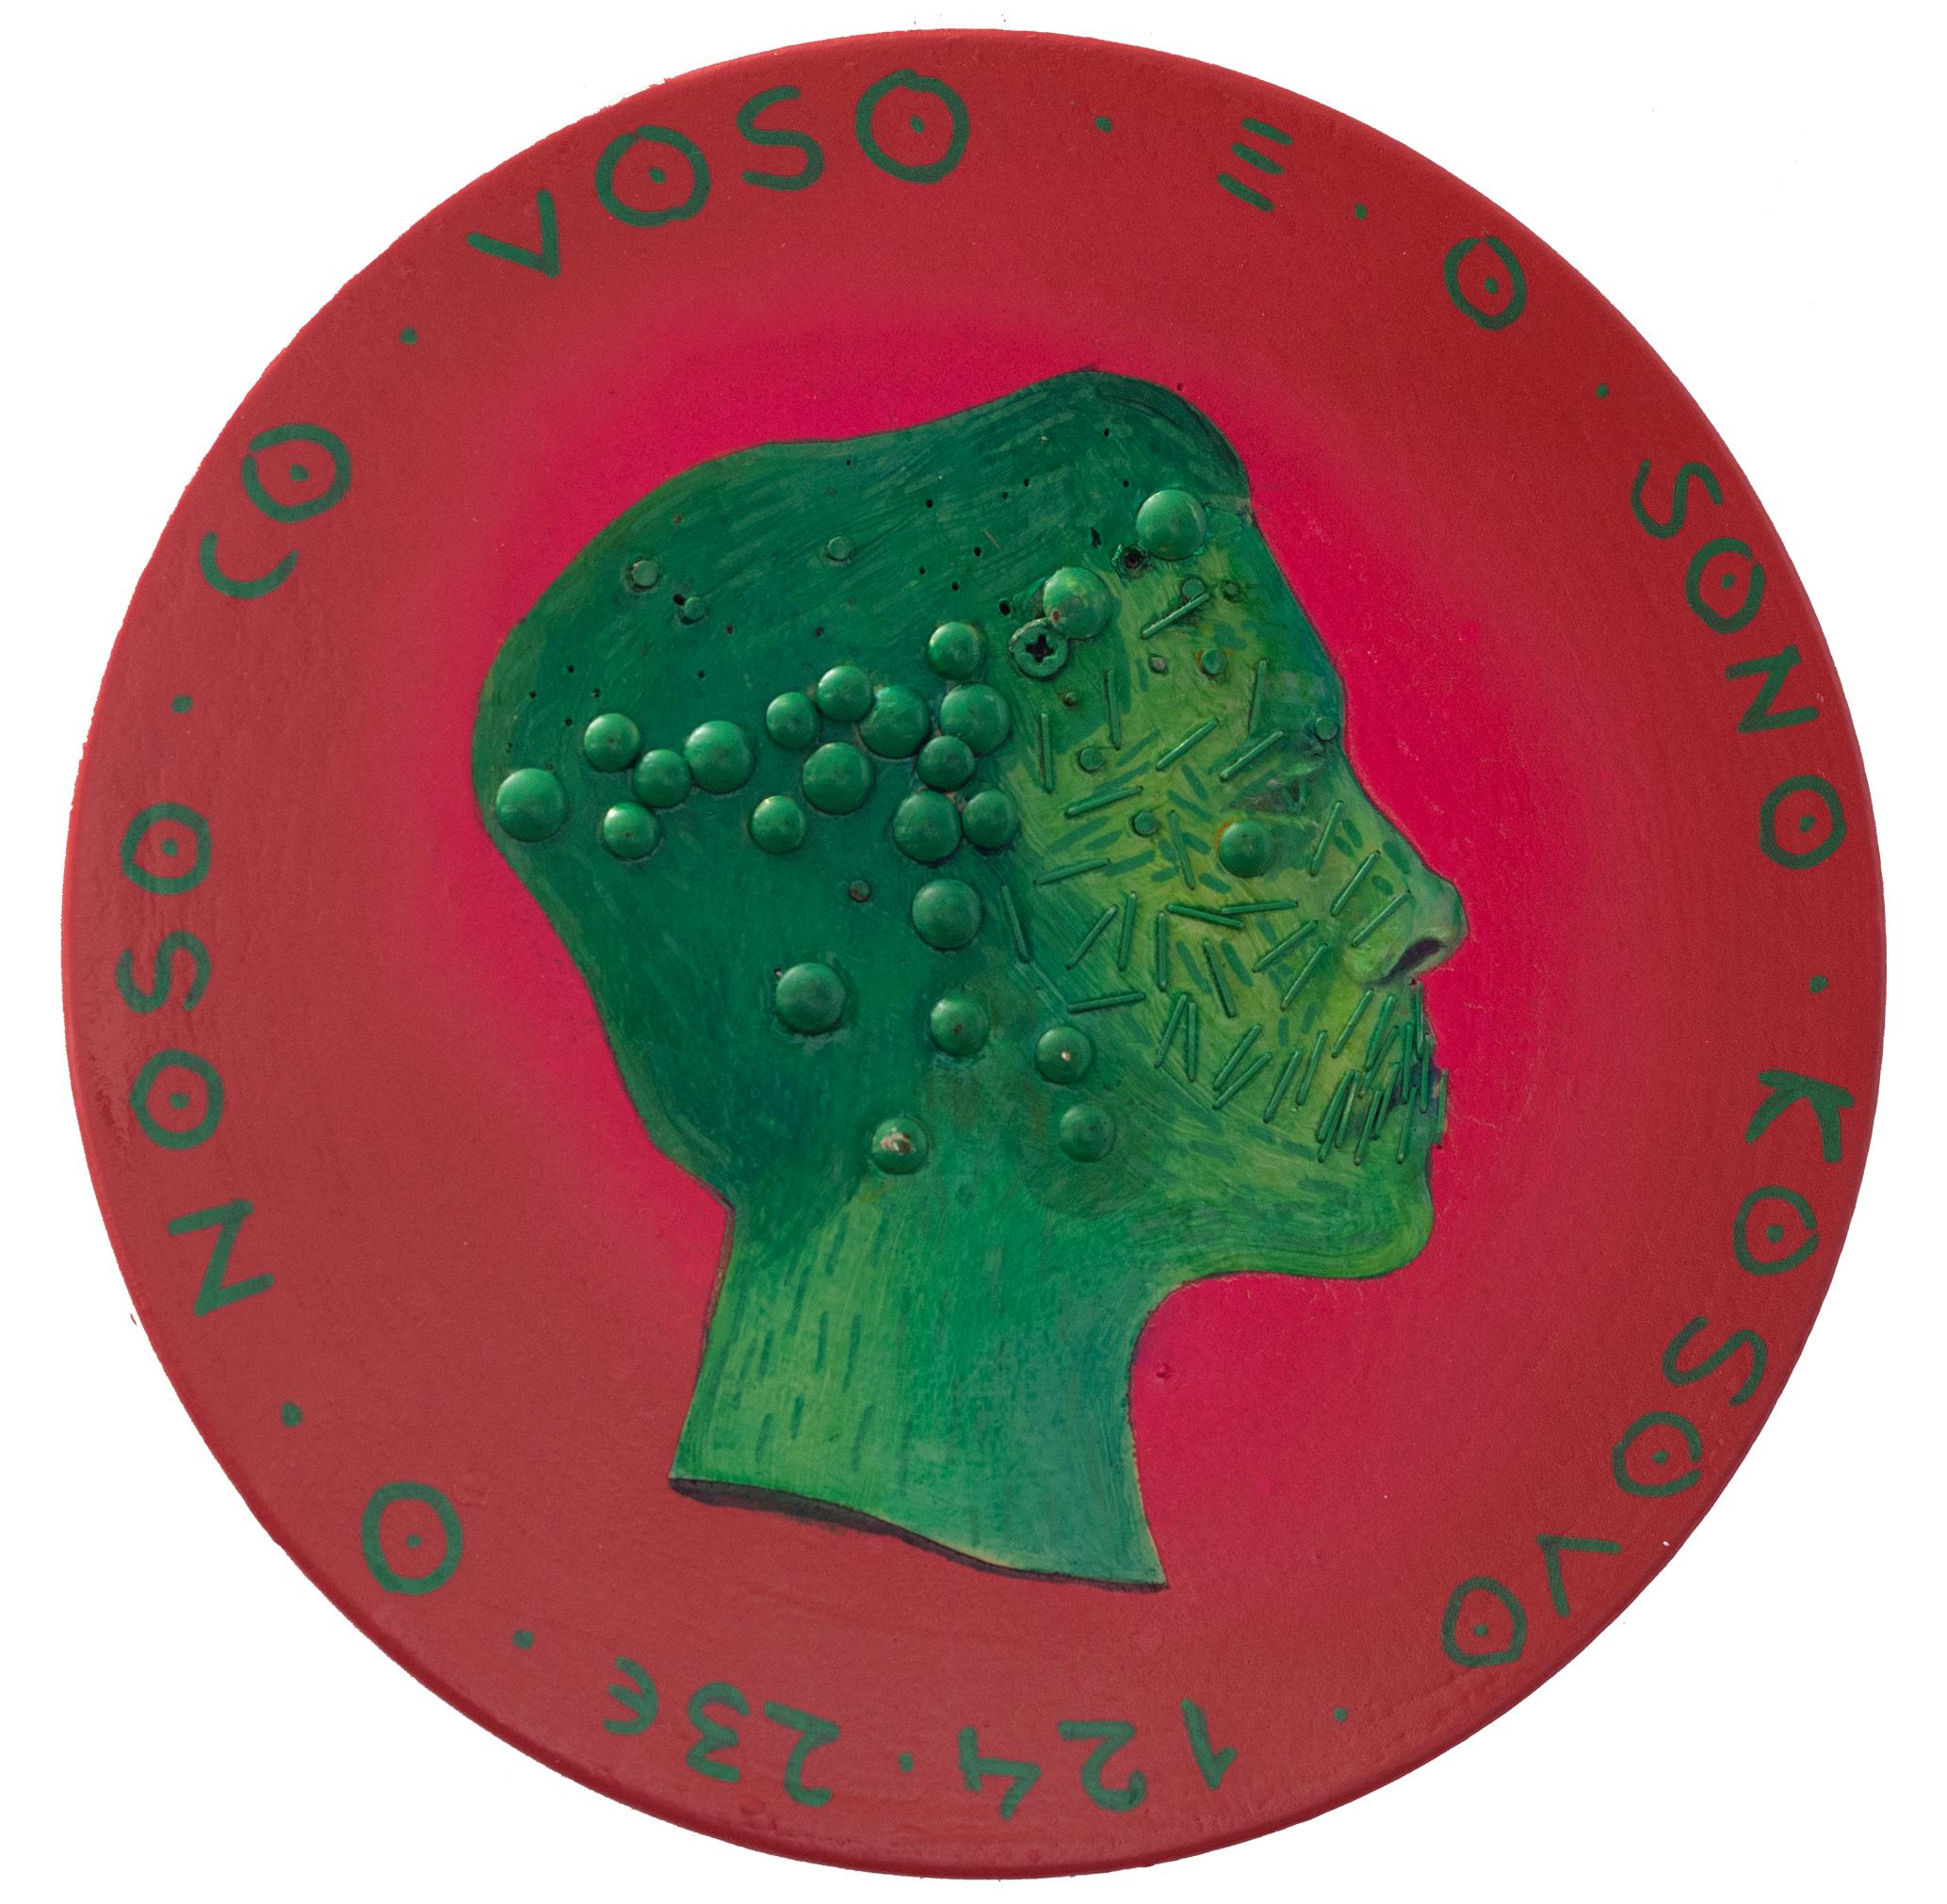 Natasha Lelenco Portrait Painting - Contemporary Mixed Media Side Profile Portrait. Red And Green.  "Currency #205"